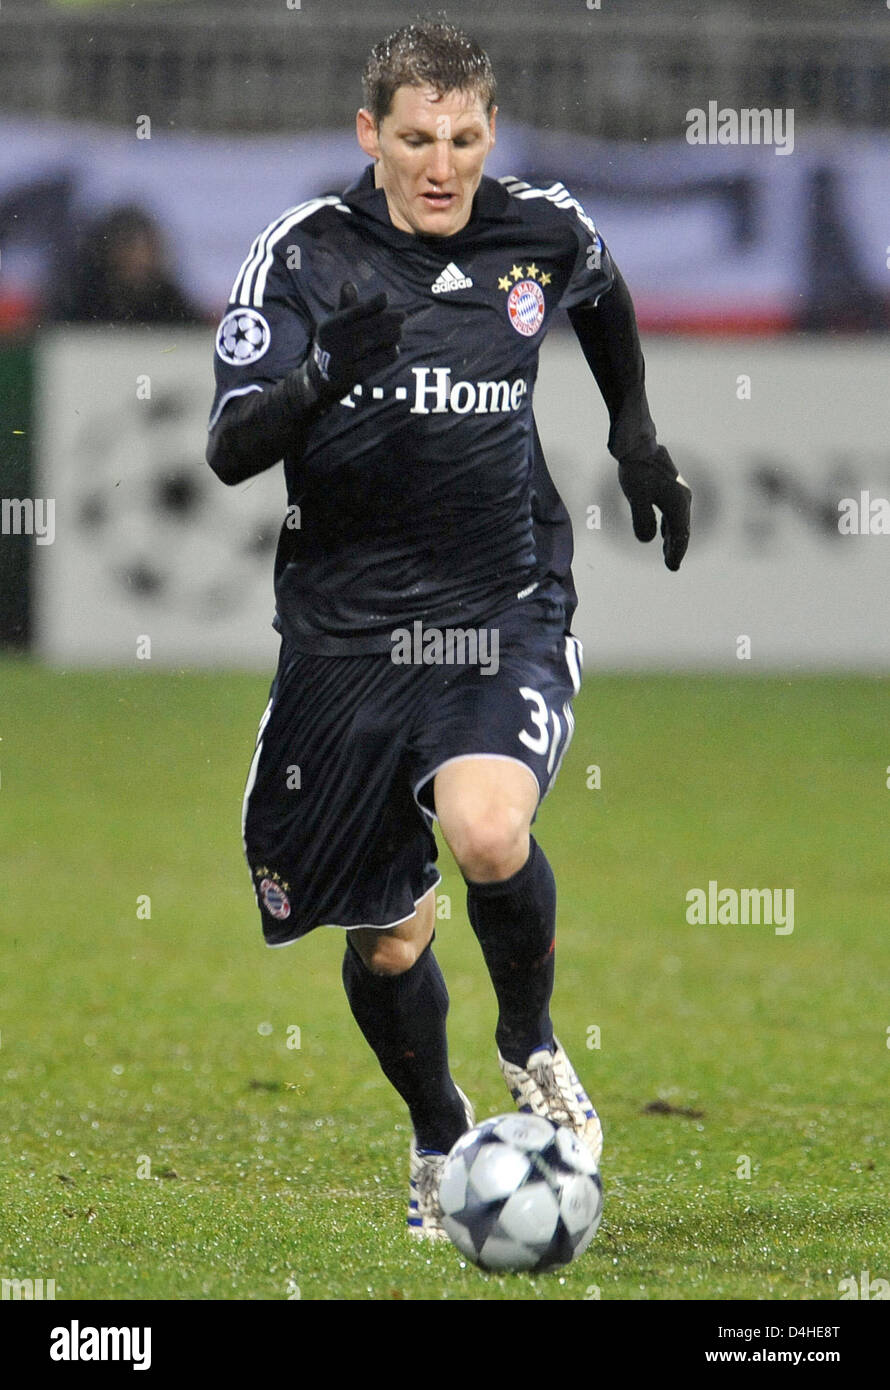 Bastian Schweinsteiger of FC Bayern Munich is shown in action during the Champions League Group F match against Olympique Lyon at Stade de Gerland in Lyon, France, 10 December 2008. Bayern Munich defeated Lyon 3-2 securing the first place in UEFA Champions League Group F. Photo: Andreas Gebert Stock Photo